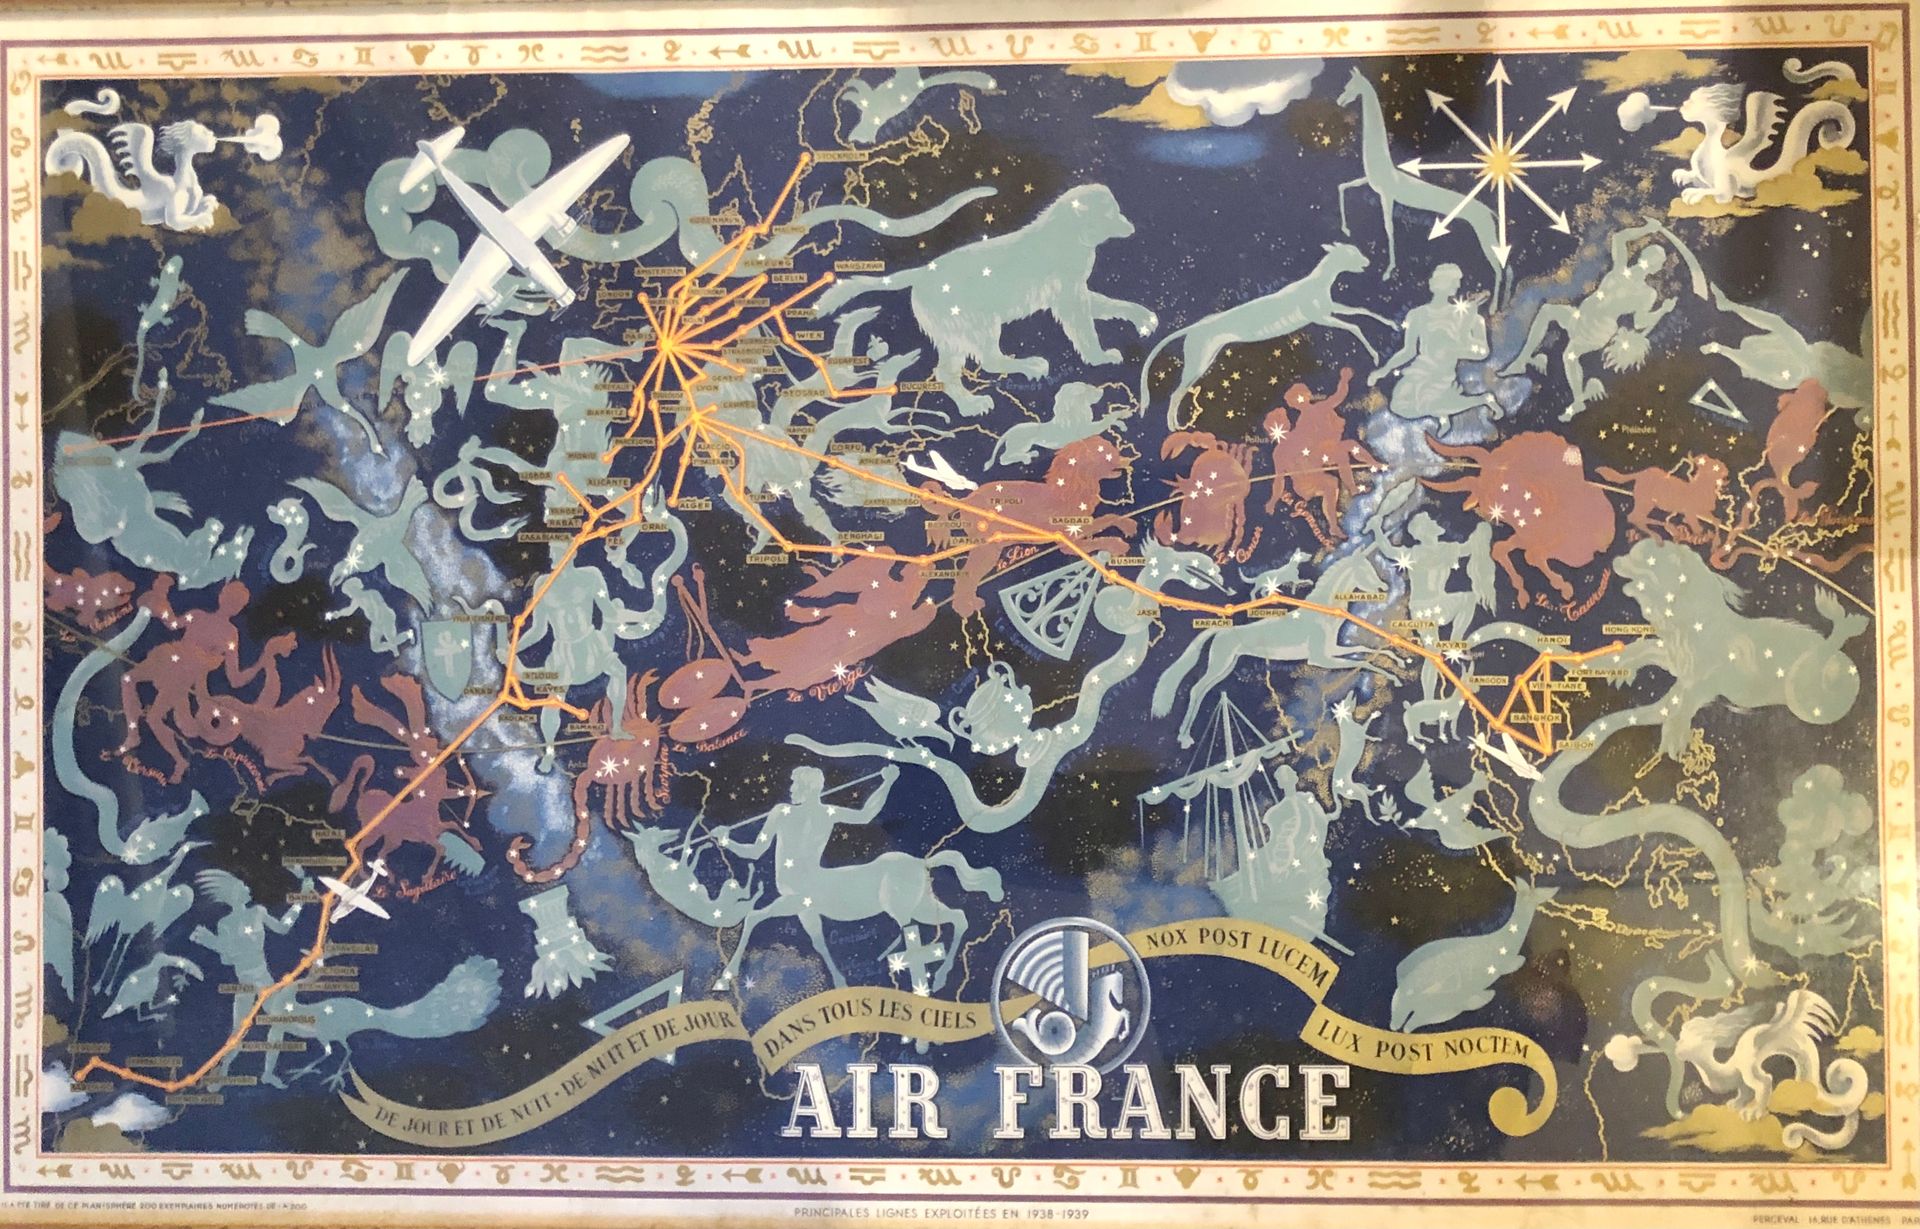 Null POSTER PLANISPHERE OF AIR FRANCE

The poster bears the name of LUCIEN BOUCH&hellip;